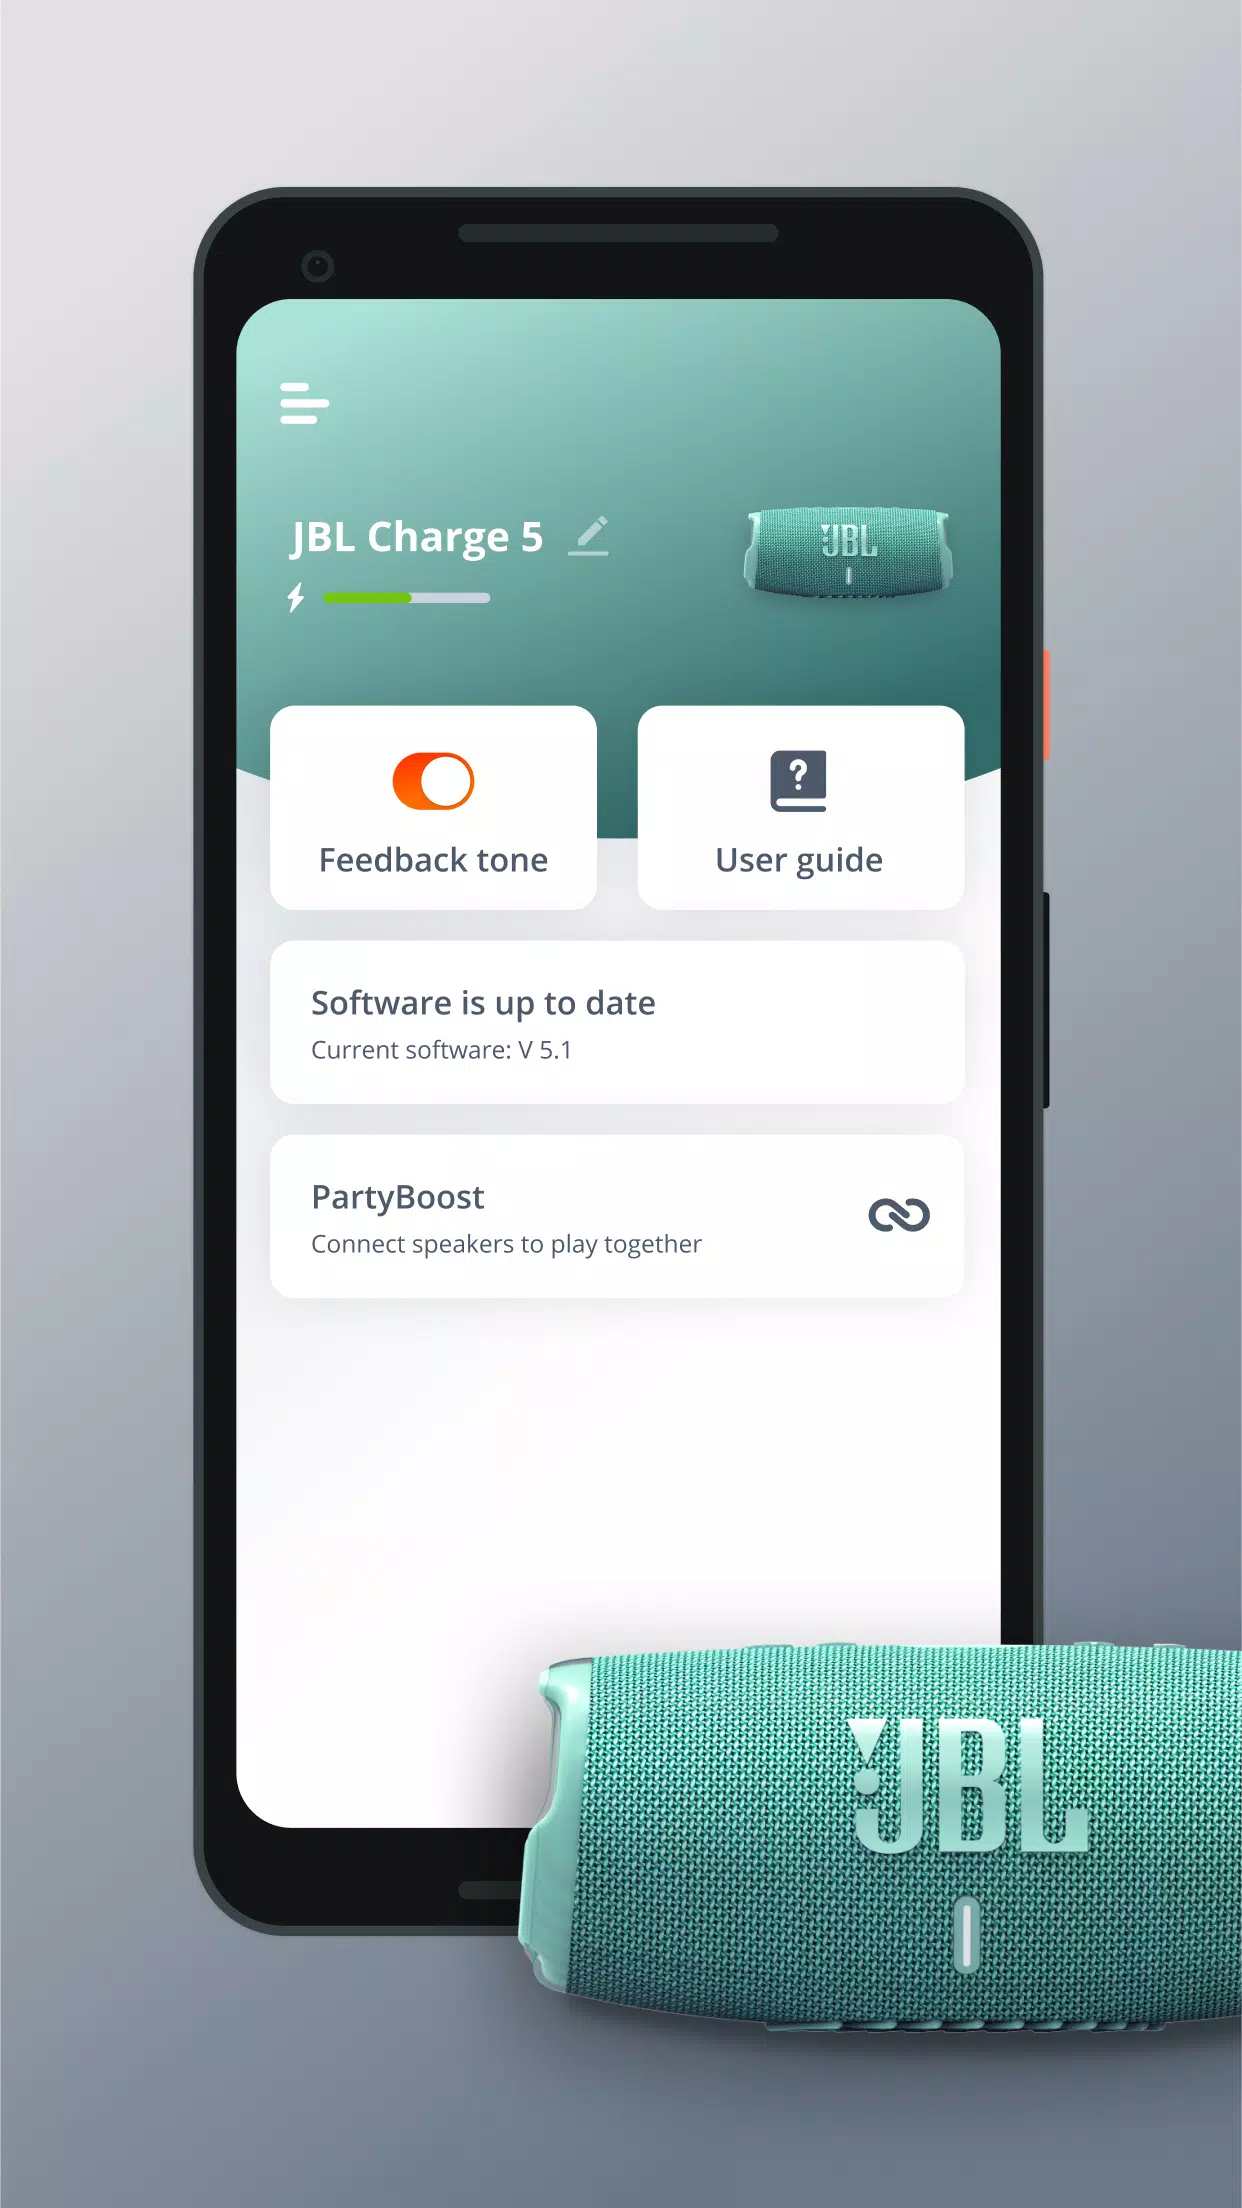 JBL Portable for Android - APK Download